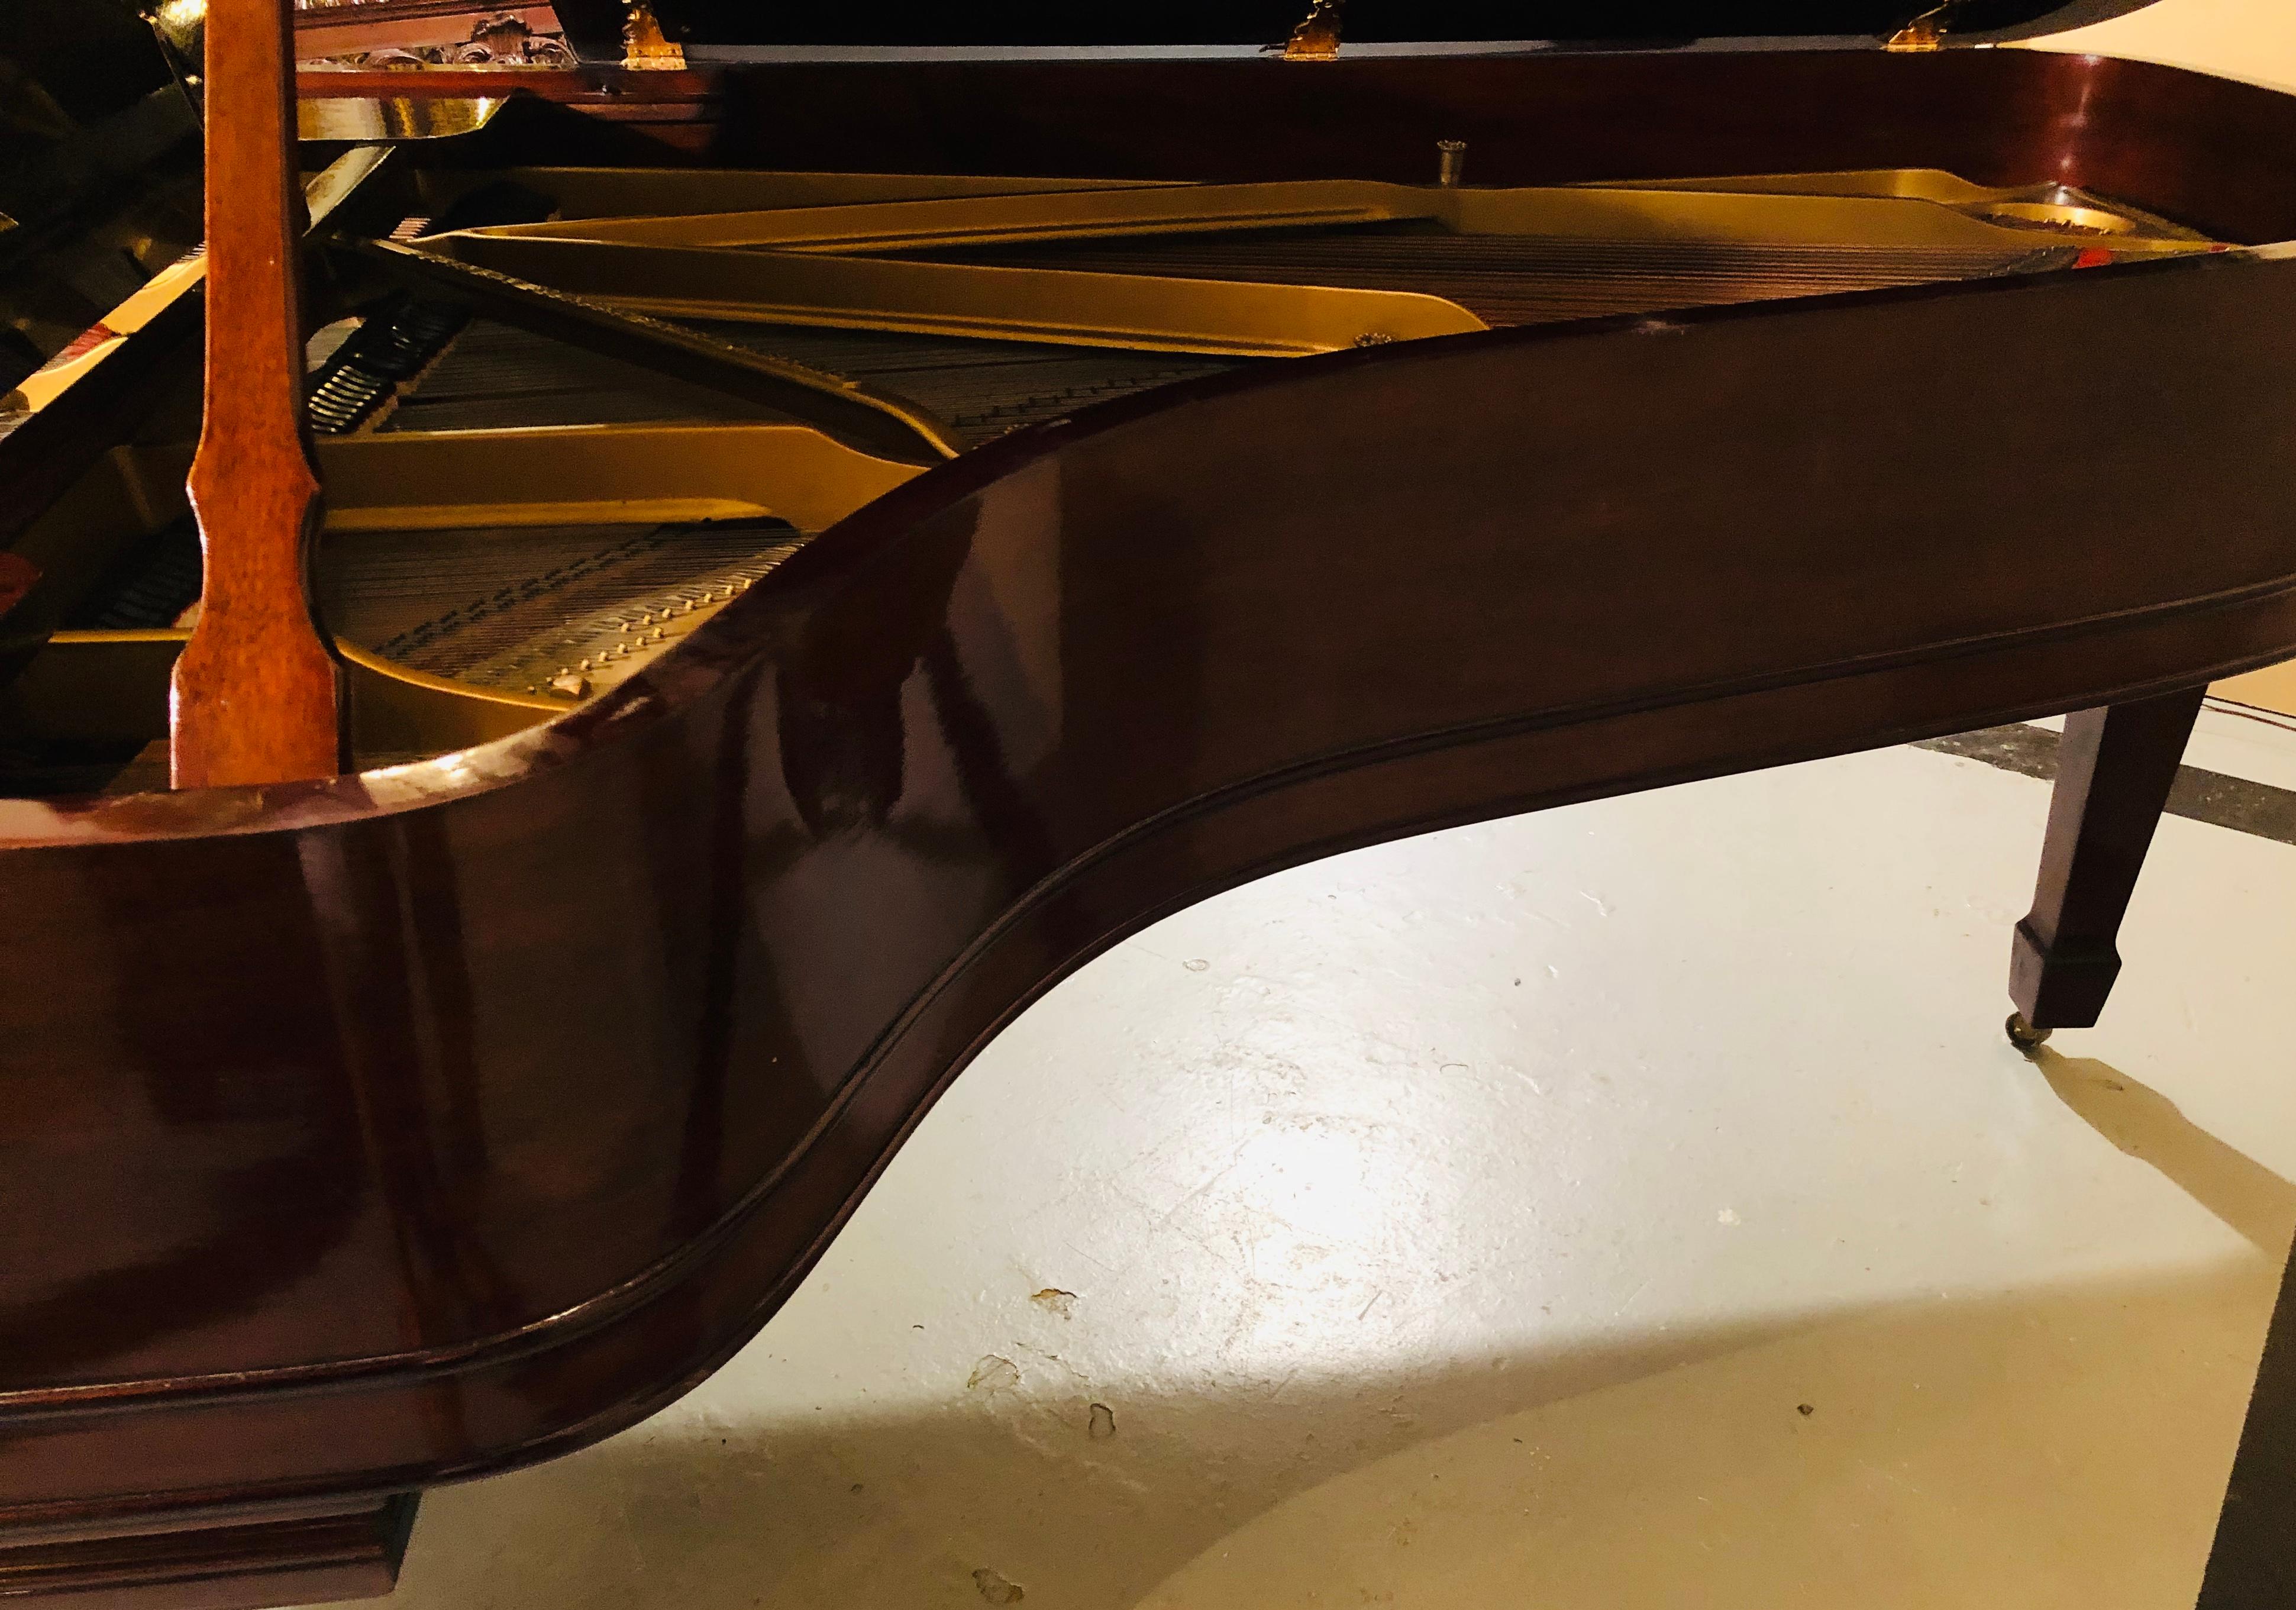 Louis XV Steinway Model B Classic Grand Piano 1901 in a Refinished Mahogany Case